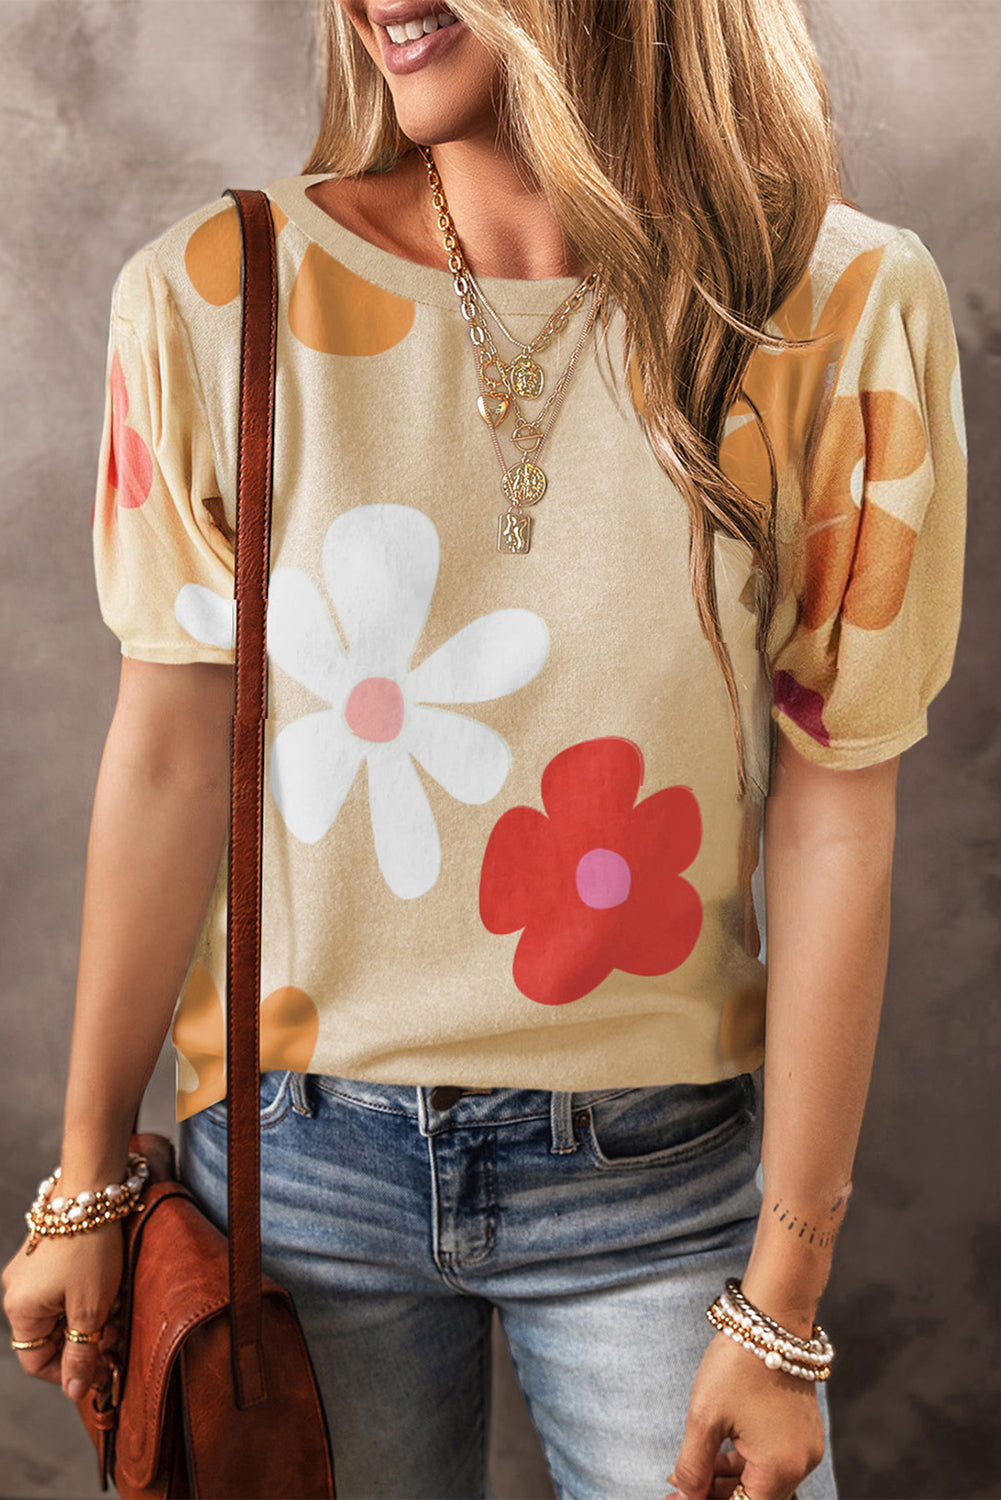 Vibrant short sleeve blouse with colorful floral print, perfect for adding a cheerful touch to any casual or semi-casual outfit.